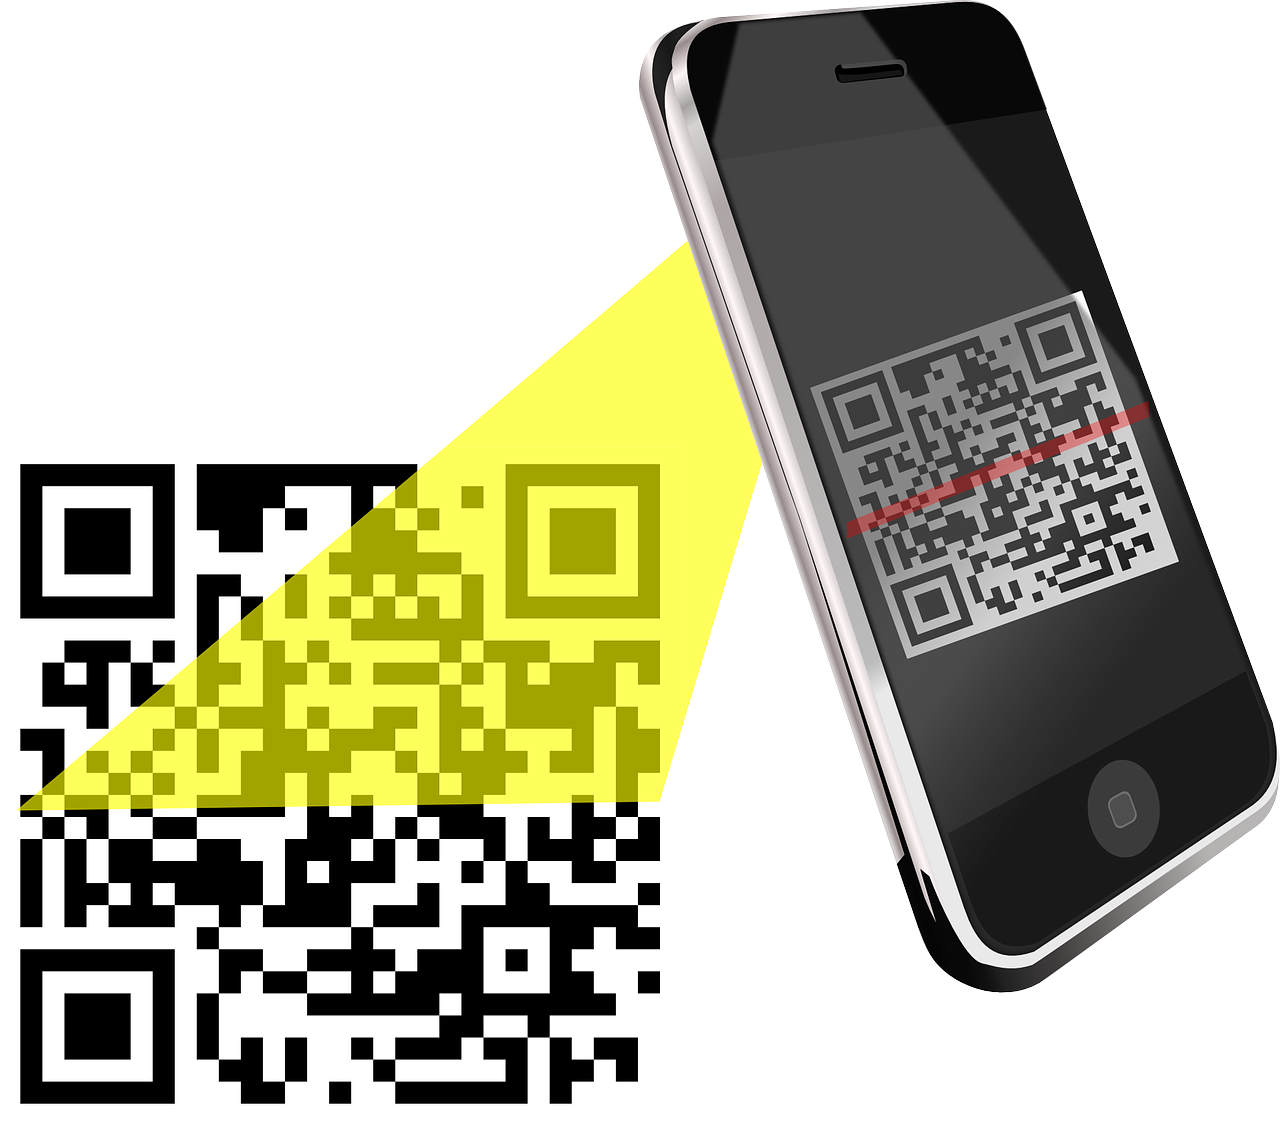 How to convert an image to QR code?